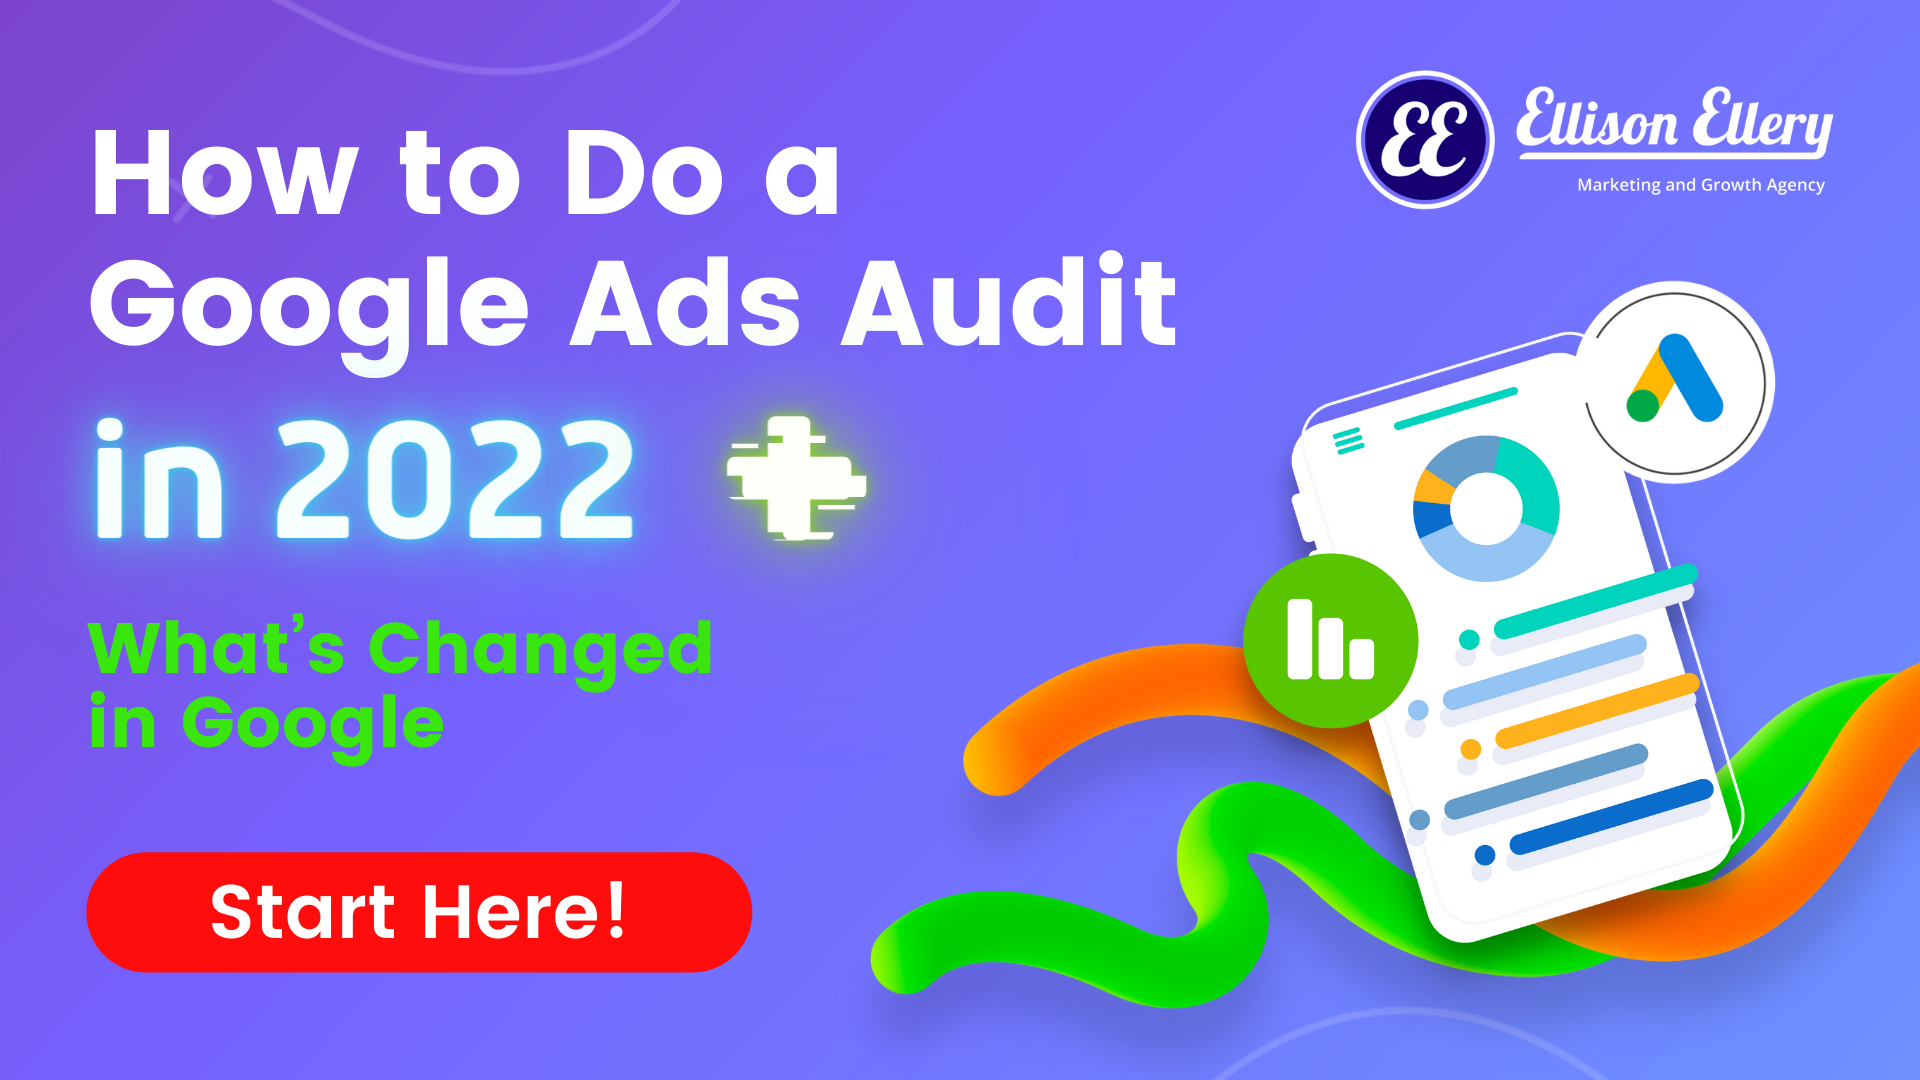 How to do a Google Ads Audit in 2022